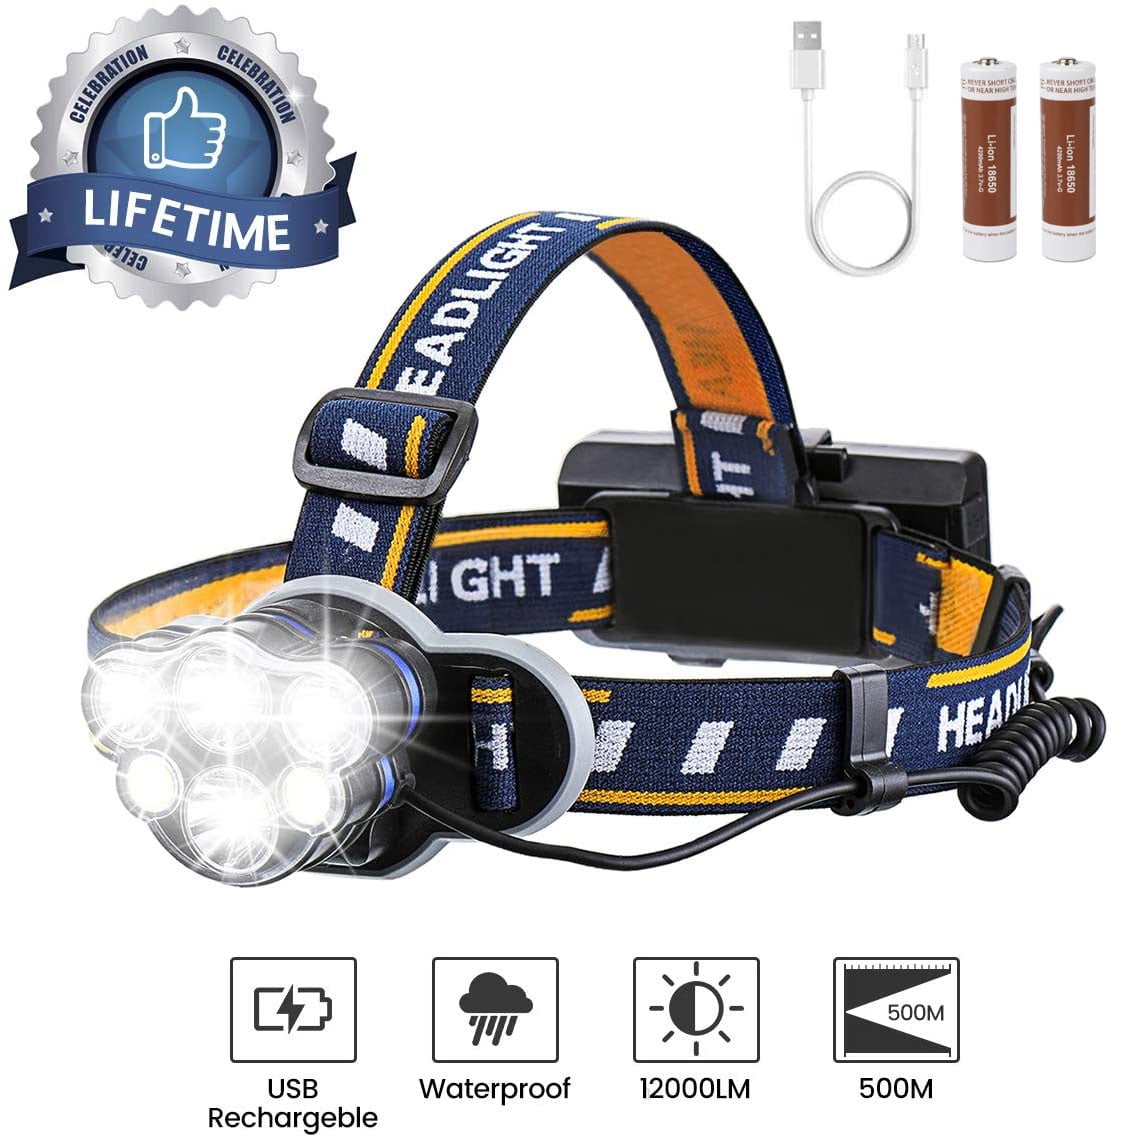 Batteries Included Guiseapue LED Head Torch,USB Headlamp,Rechargeable 8 Modes Zoomable Head Flashlight Waterproof Headlight for Running Hiking Reading Camping Outdoor